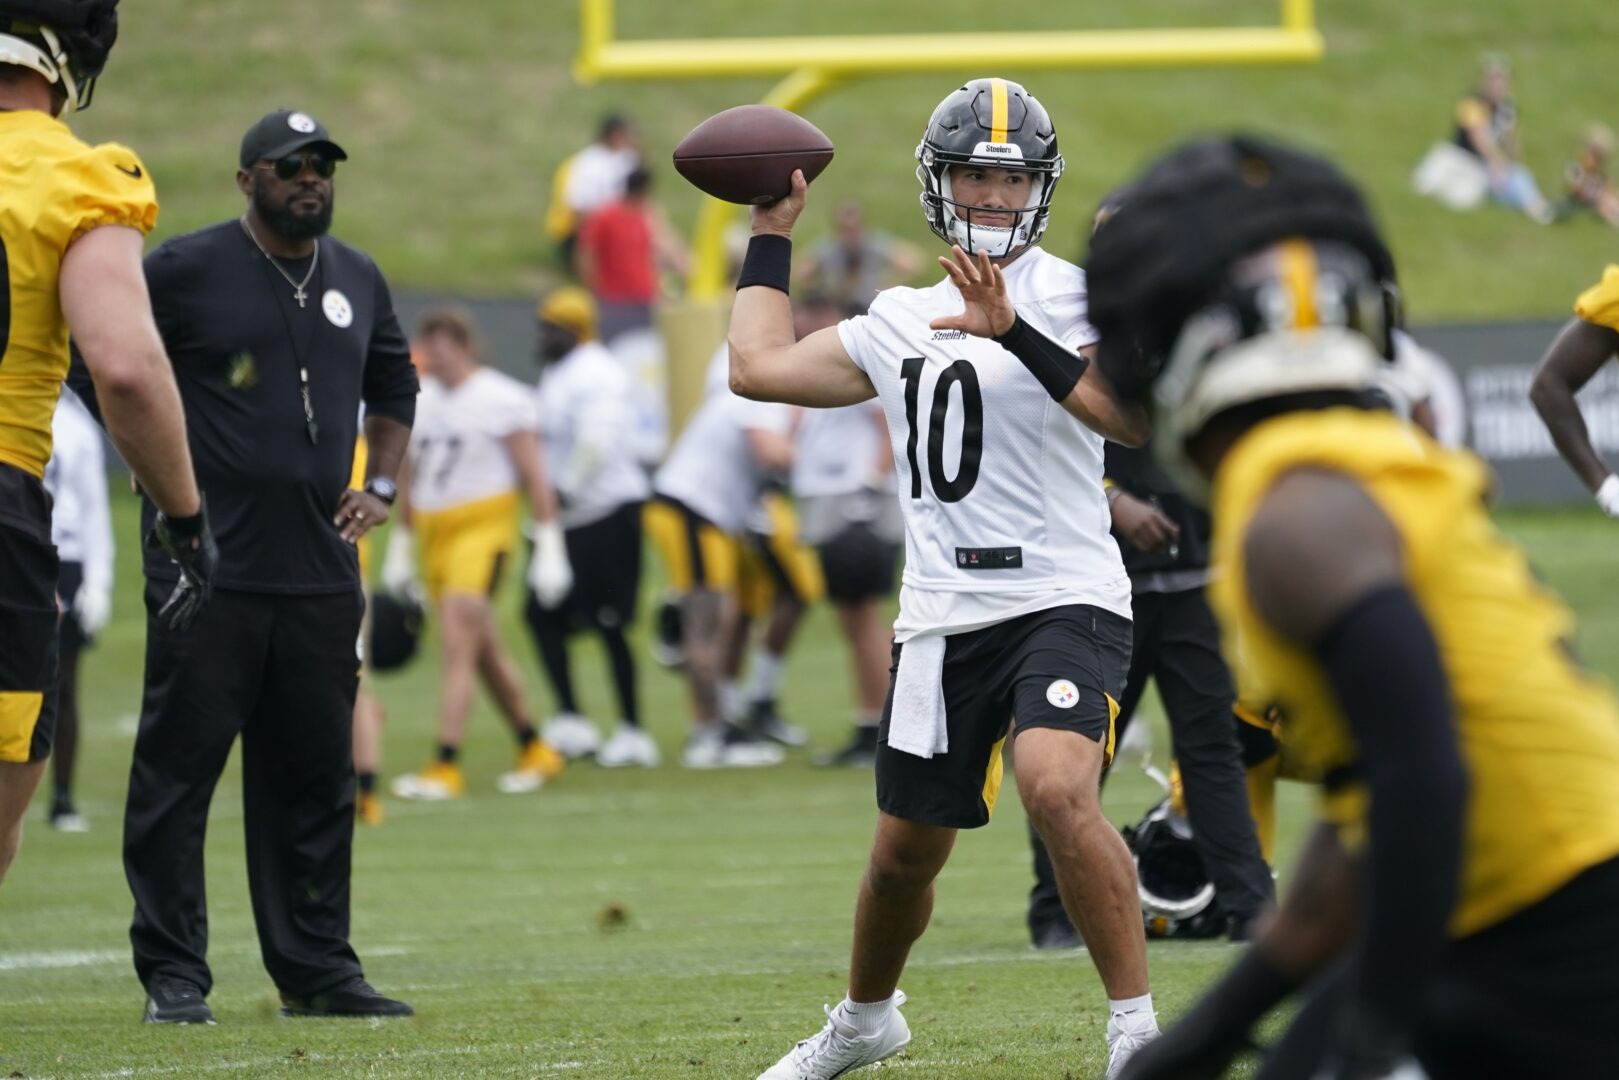 Pittsburgh Steelers quarterback Mitch Trubisky takes part in a drill during practice at their NFL football training camp facility in Latrobe, Pa., Wednesday, July 27, 2022.